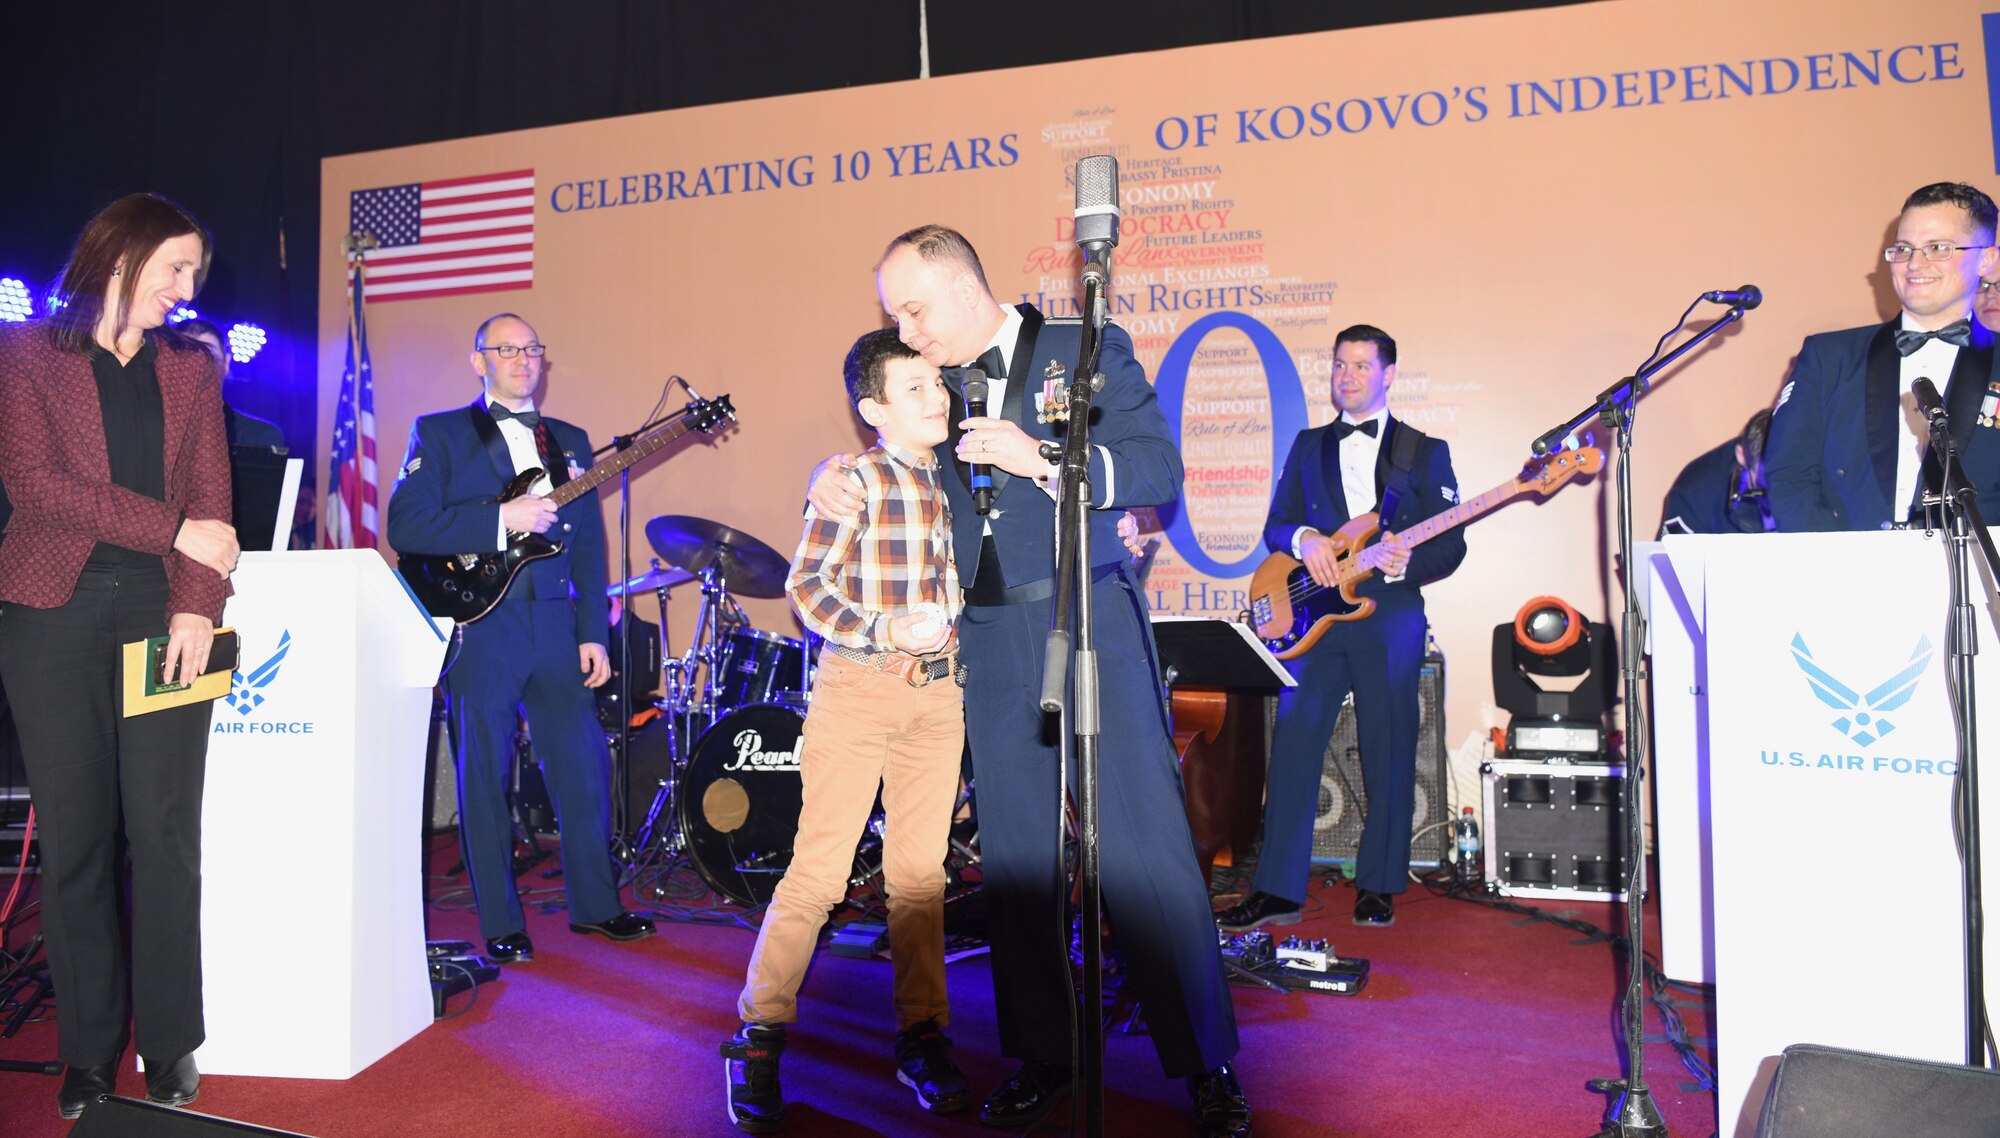 The U.S. Air Forces in Europe Band Commander, Lt. Col. Don Schofield, presents a souvenir baseball to a local child during a concert at Red Hall in Pristina celebrating the country’s 10th anniversary of independence, Feb. 16, 2018. The event was hosted by the U.S. Ambassador to Kosovo, Greg Delawie, and broadcast live on Radio Television of Kosovo, the most-viewed television station in the country. The audience included diplomats, members of the Kosovo Security Forces and dozens of young Kosovars invited by the embassy. (U.S. Air Force photo by Maj. Tristan Hinderliter)